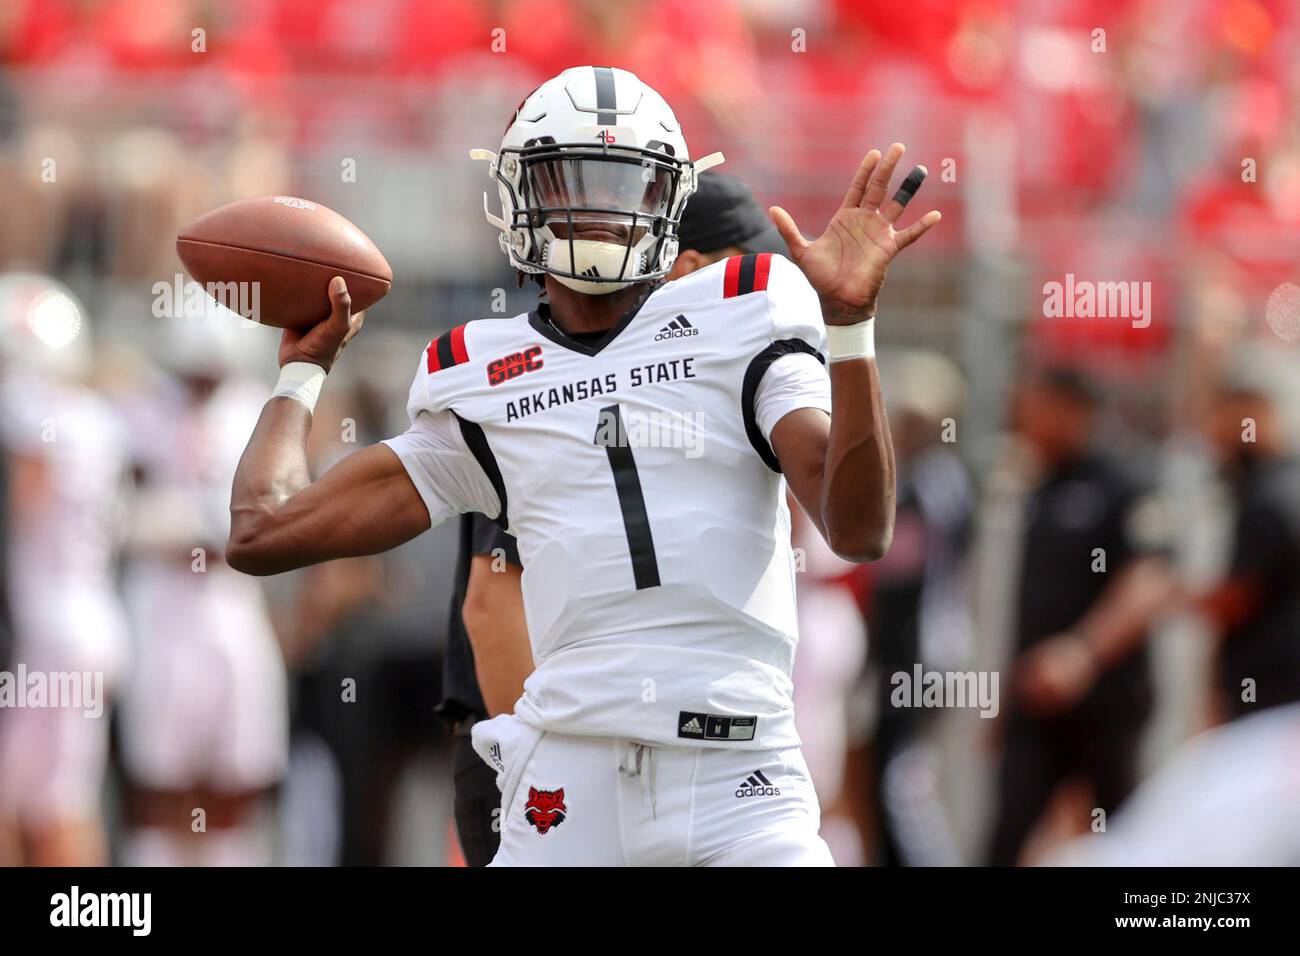 COLUMBUS, OH - SEPTEMBER 10: Arkansas State Red Wolves quarterback James Blackman (1) warms up prior to the college football game between the Arkansas State Red Wolves and Ohio State Buckeyes on September 10, 2022, at Ohio Stadium in Columbus, OH. (Photo by Frank Jansky/Icon Sportswire) (Icon Sportswire via AP Images) Stock Photo